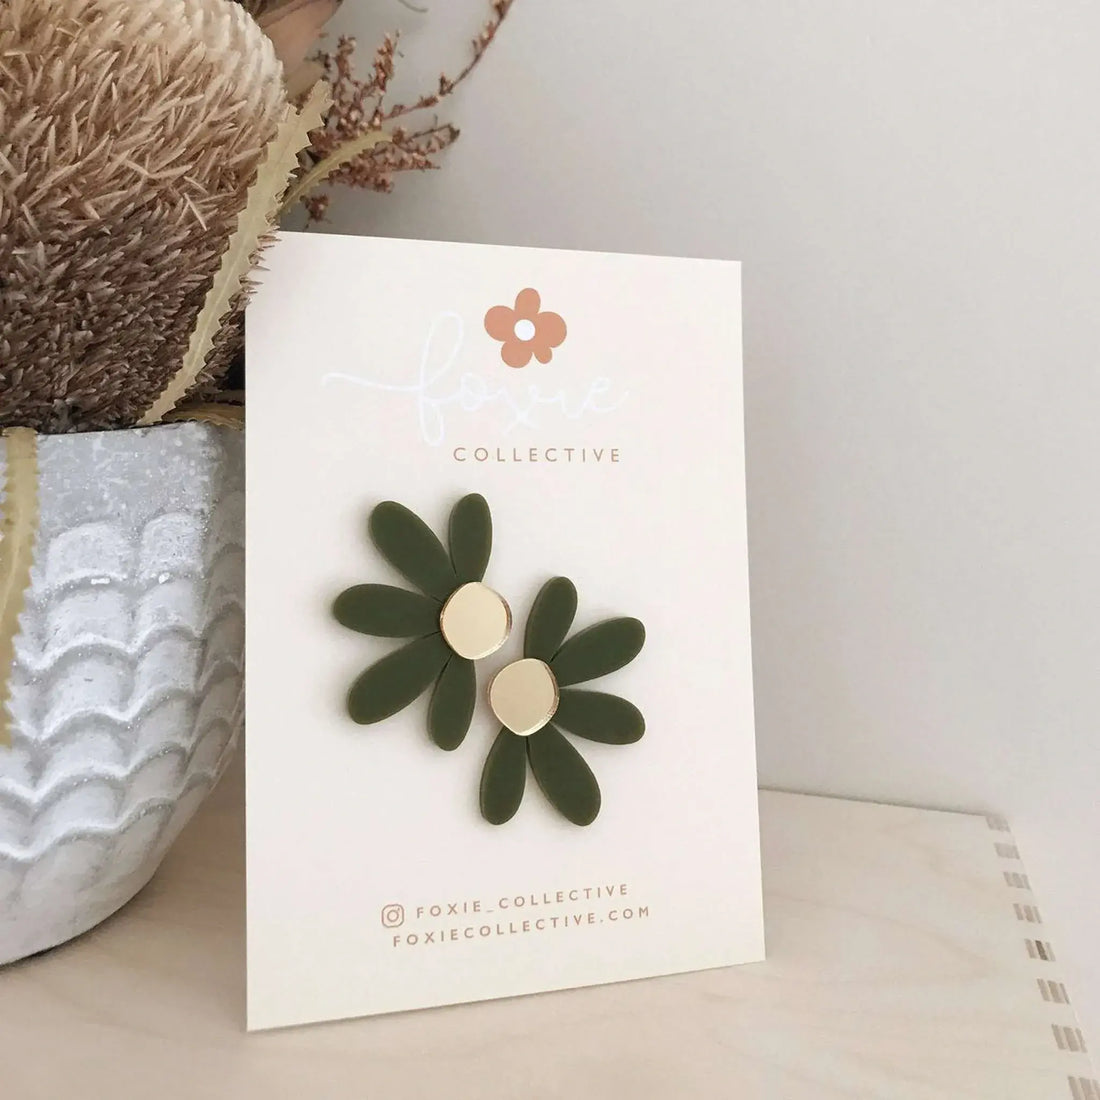 Handmade Jumbo Daisy Stud Earrings in Olive Green &amp; Gold by Foxie Collective